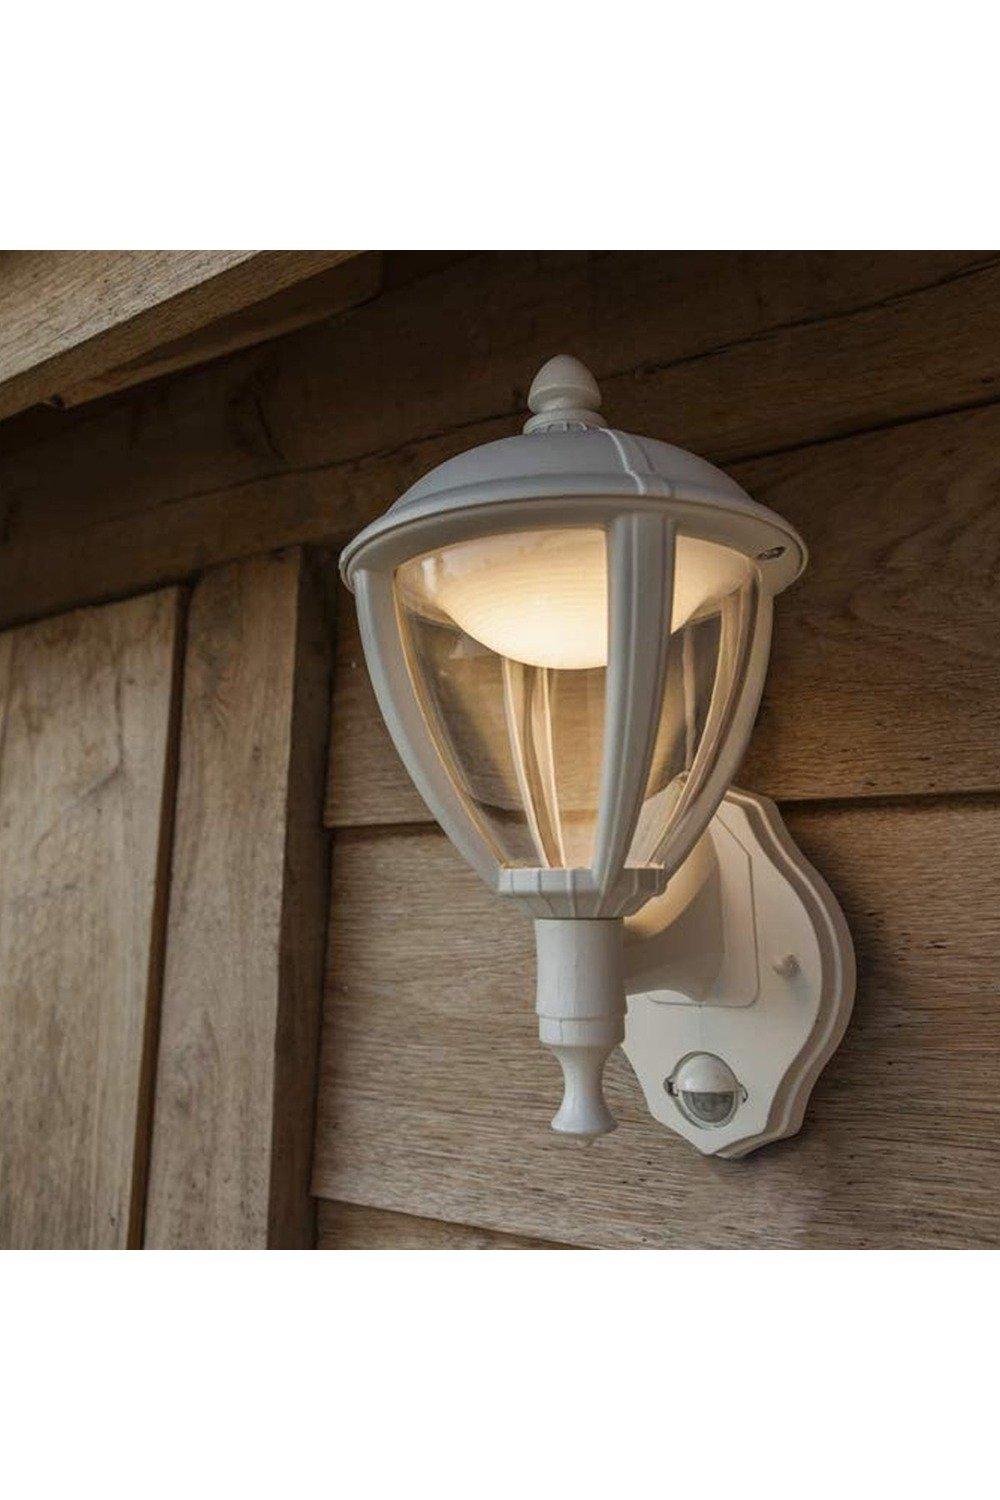 'Cindy' White With Motion Sensor Outdoor LED Wall Coach Lantern Light